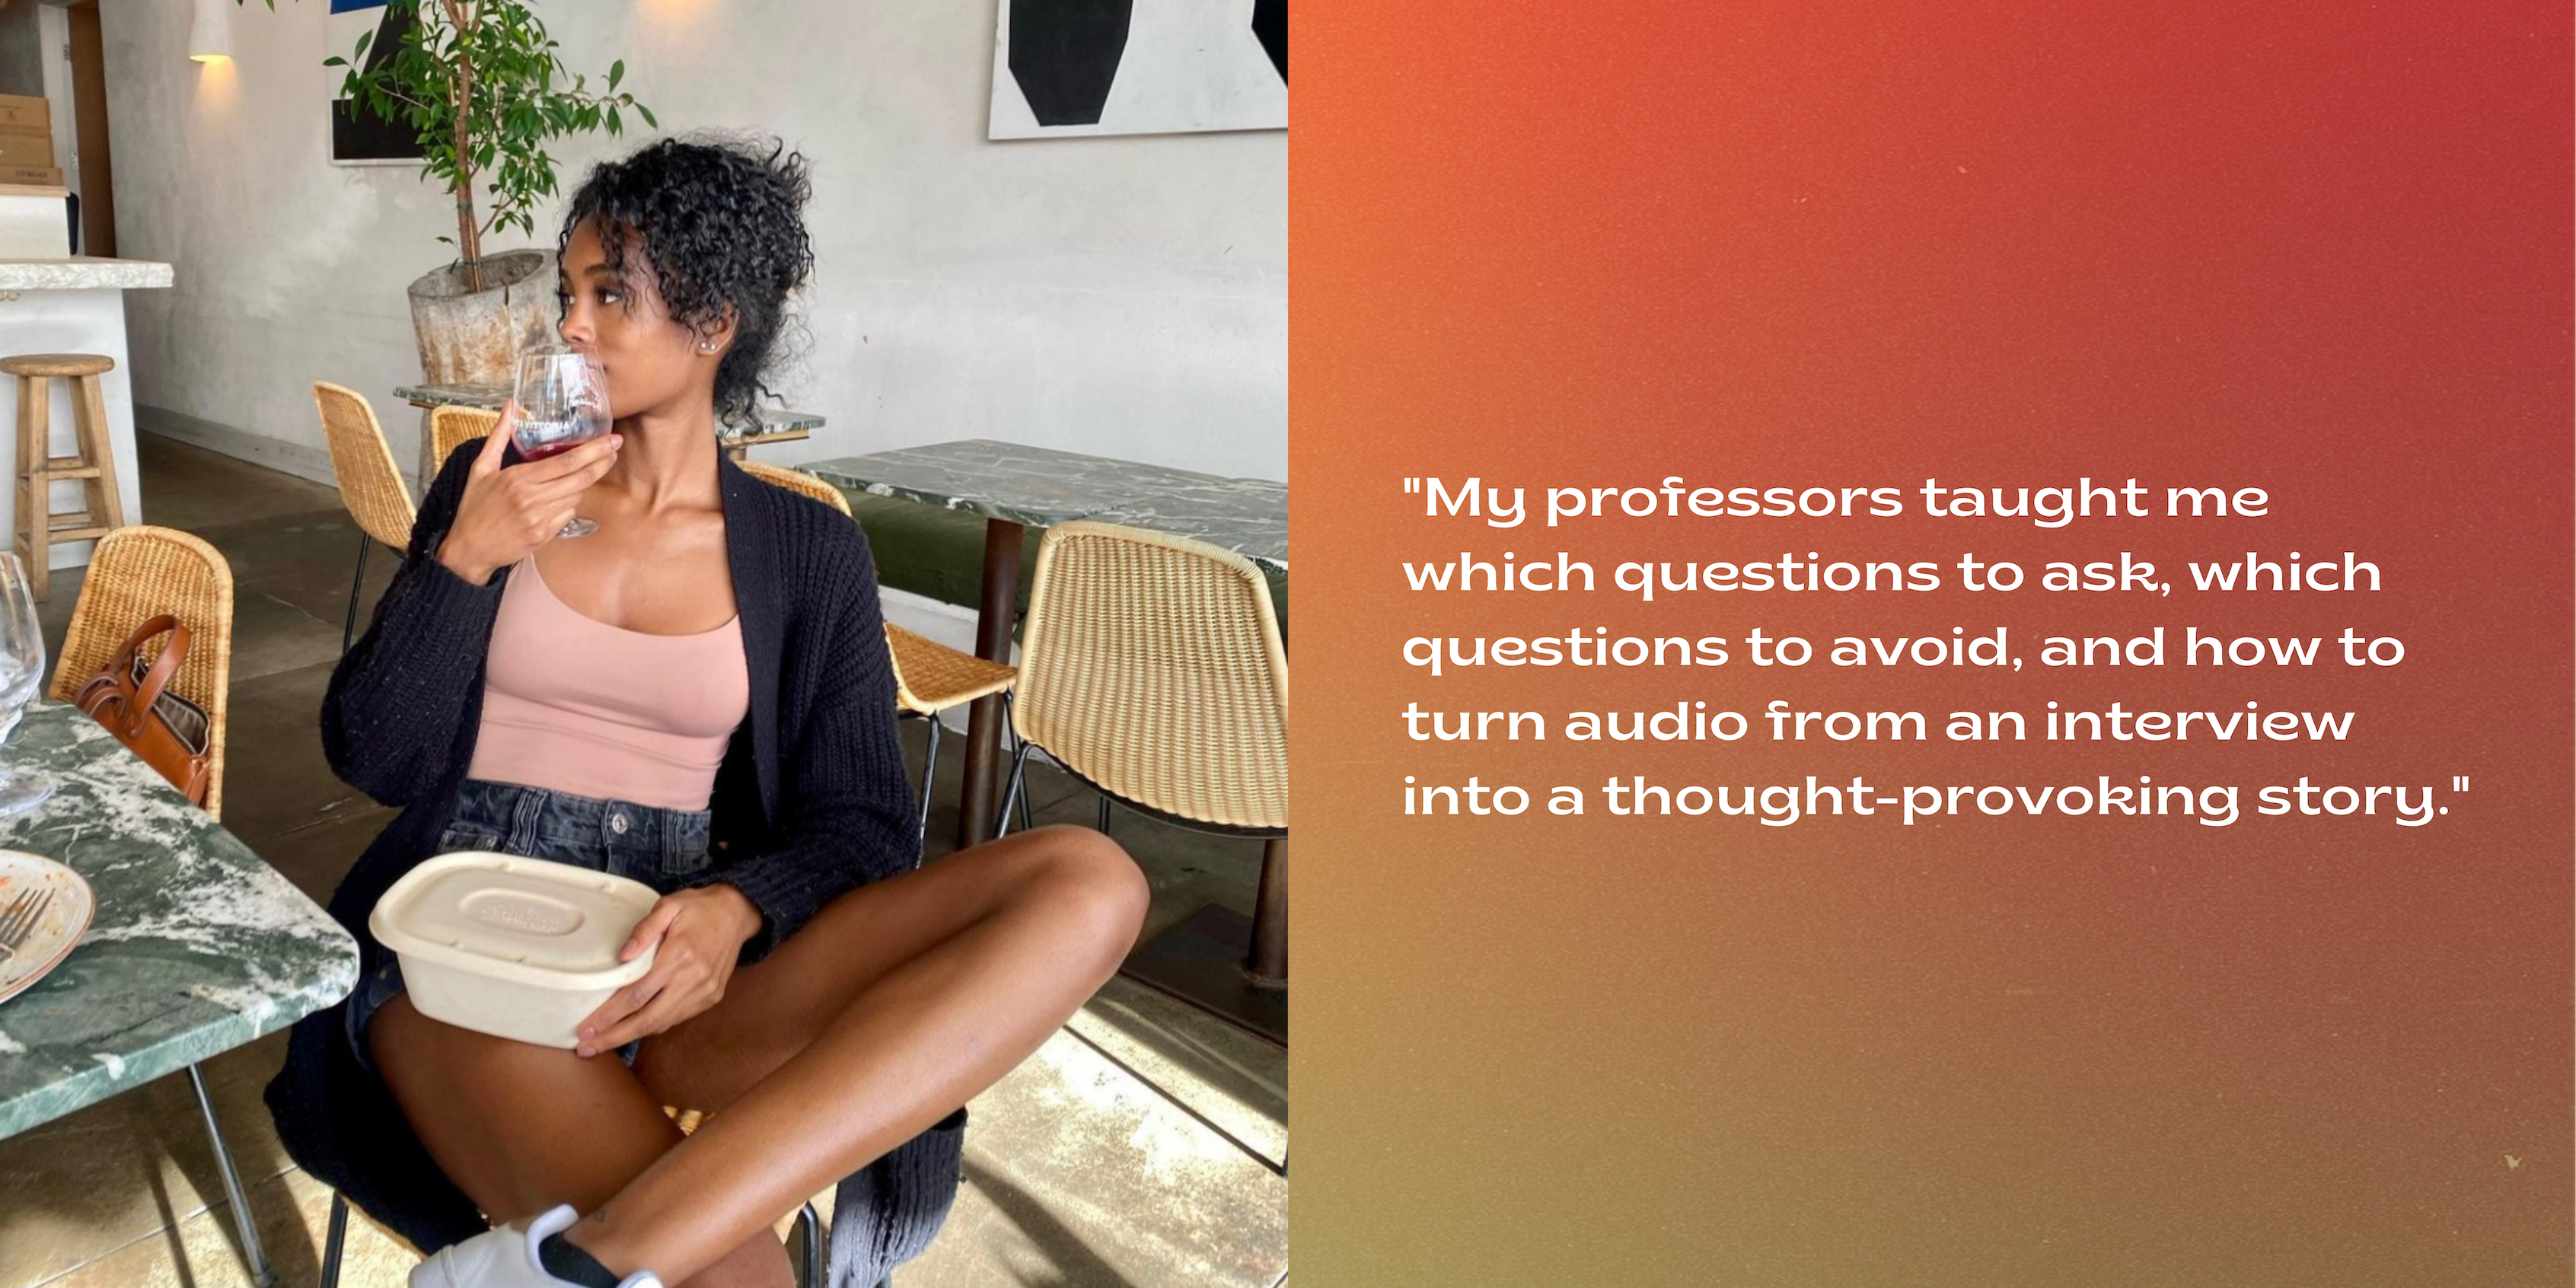 Green, orange and red background. On the right is quote in white text that says, "My professors taught me which questions to ask, which questions to avoid, and how to turn audio from an interview into a thought-provoking story." On the left is a photo of freelance writer Brianna Holt.